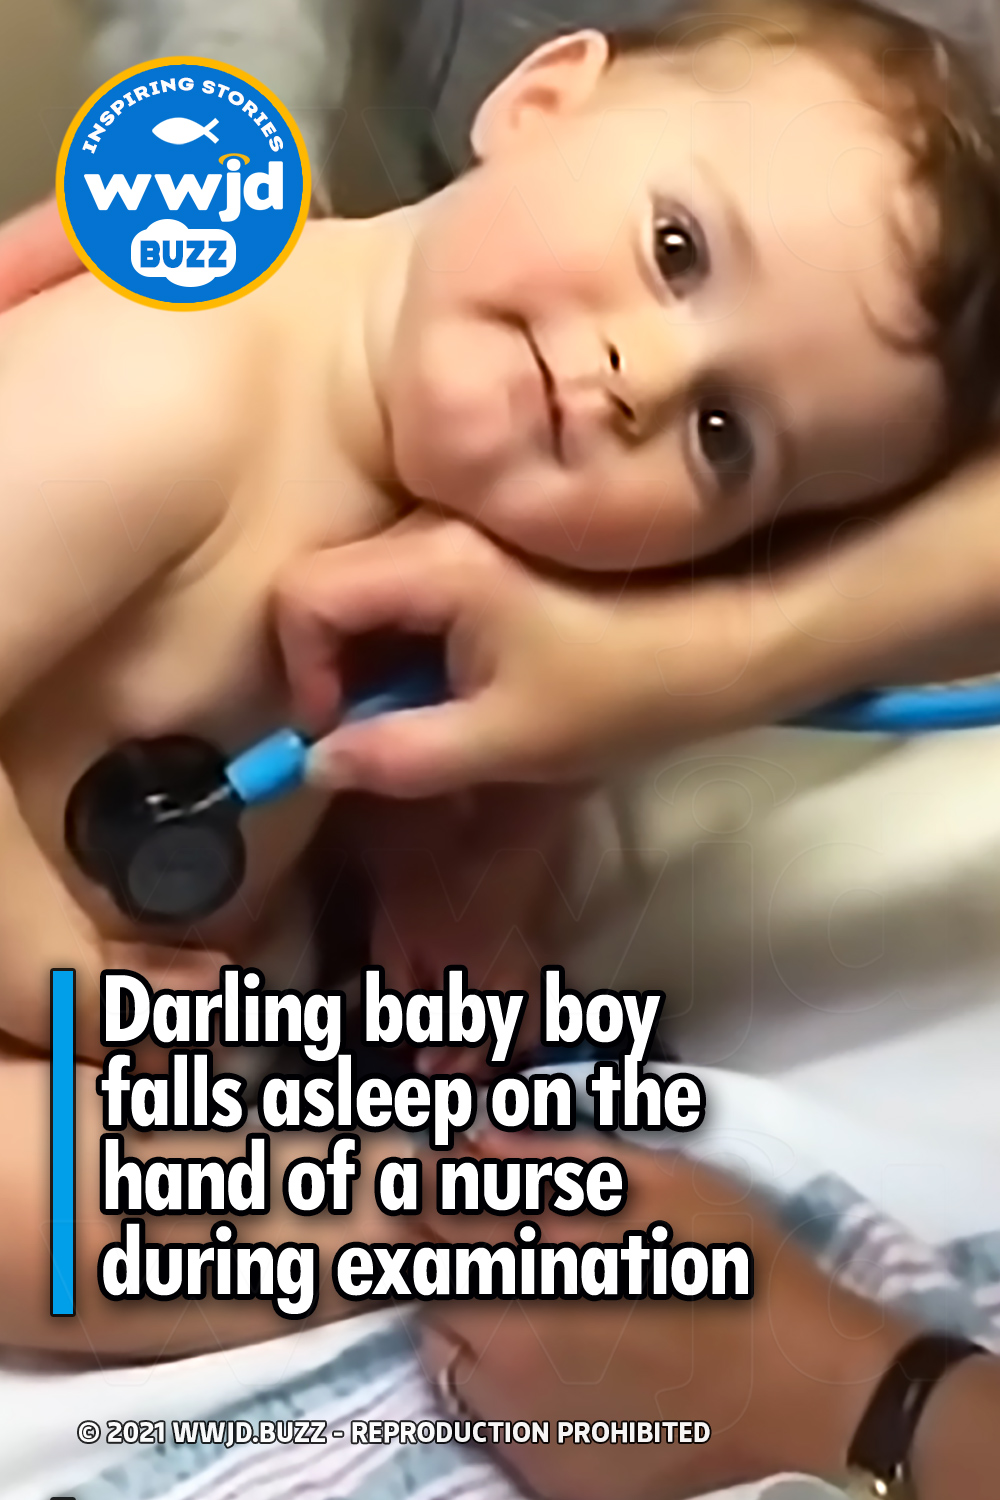 Darling baby boy falls asleep on the hand of a nurse during examination